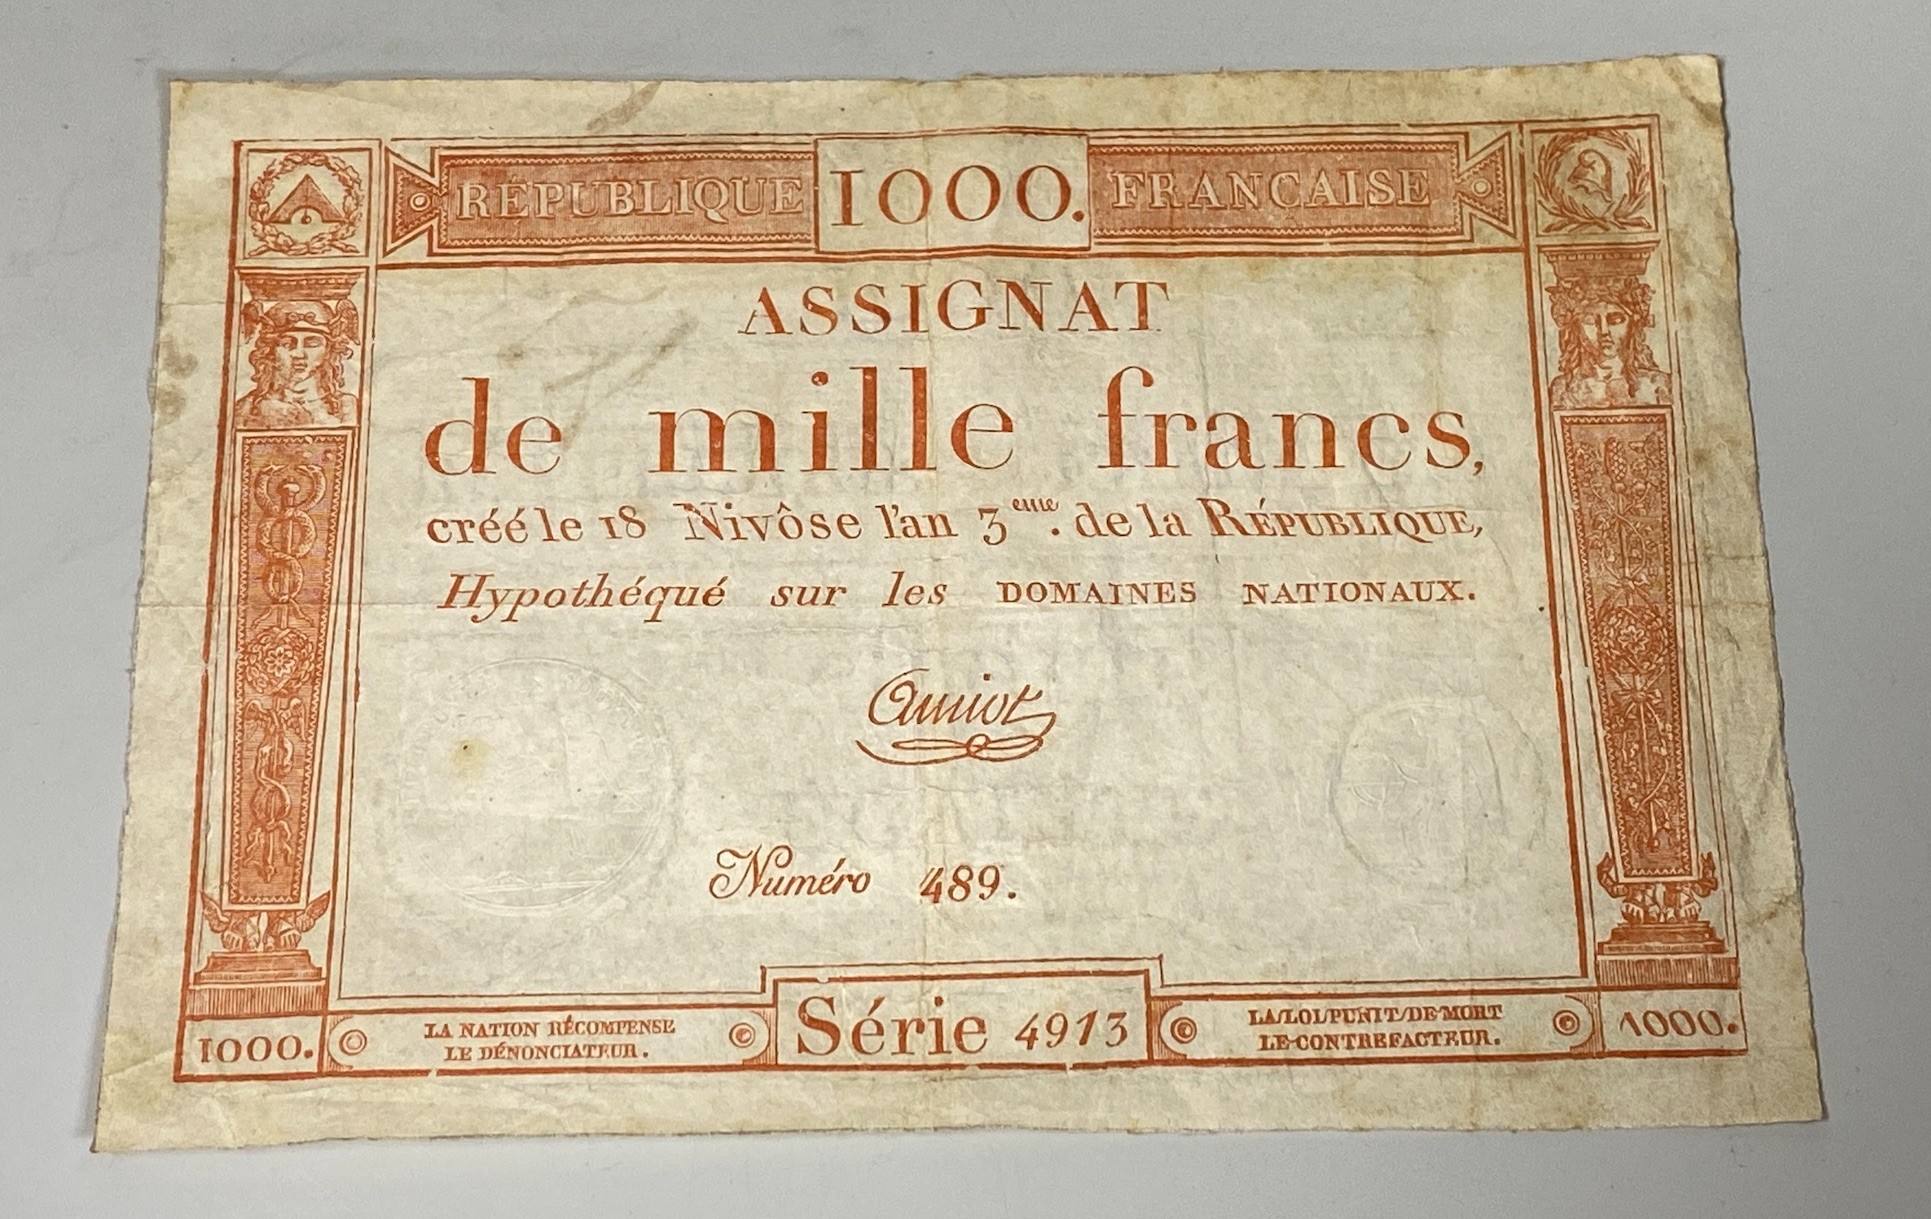 French Revolutionary banknotes, Republic Francaise, three Assignat de mille francs 1000 Francs 18 Nivose An III - 1795, Serie 9024, Numero 8, Serie 9030, Numero 259 and Serie 4913, Numero 489, watermarks (3)